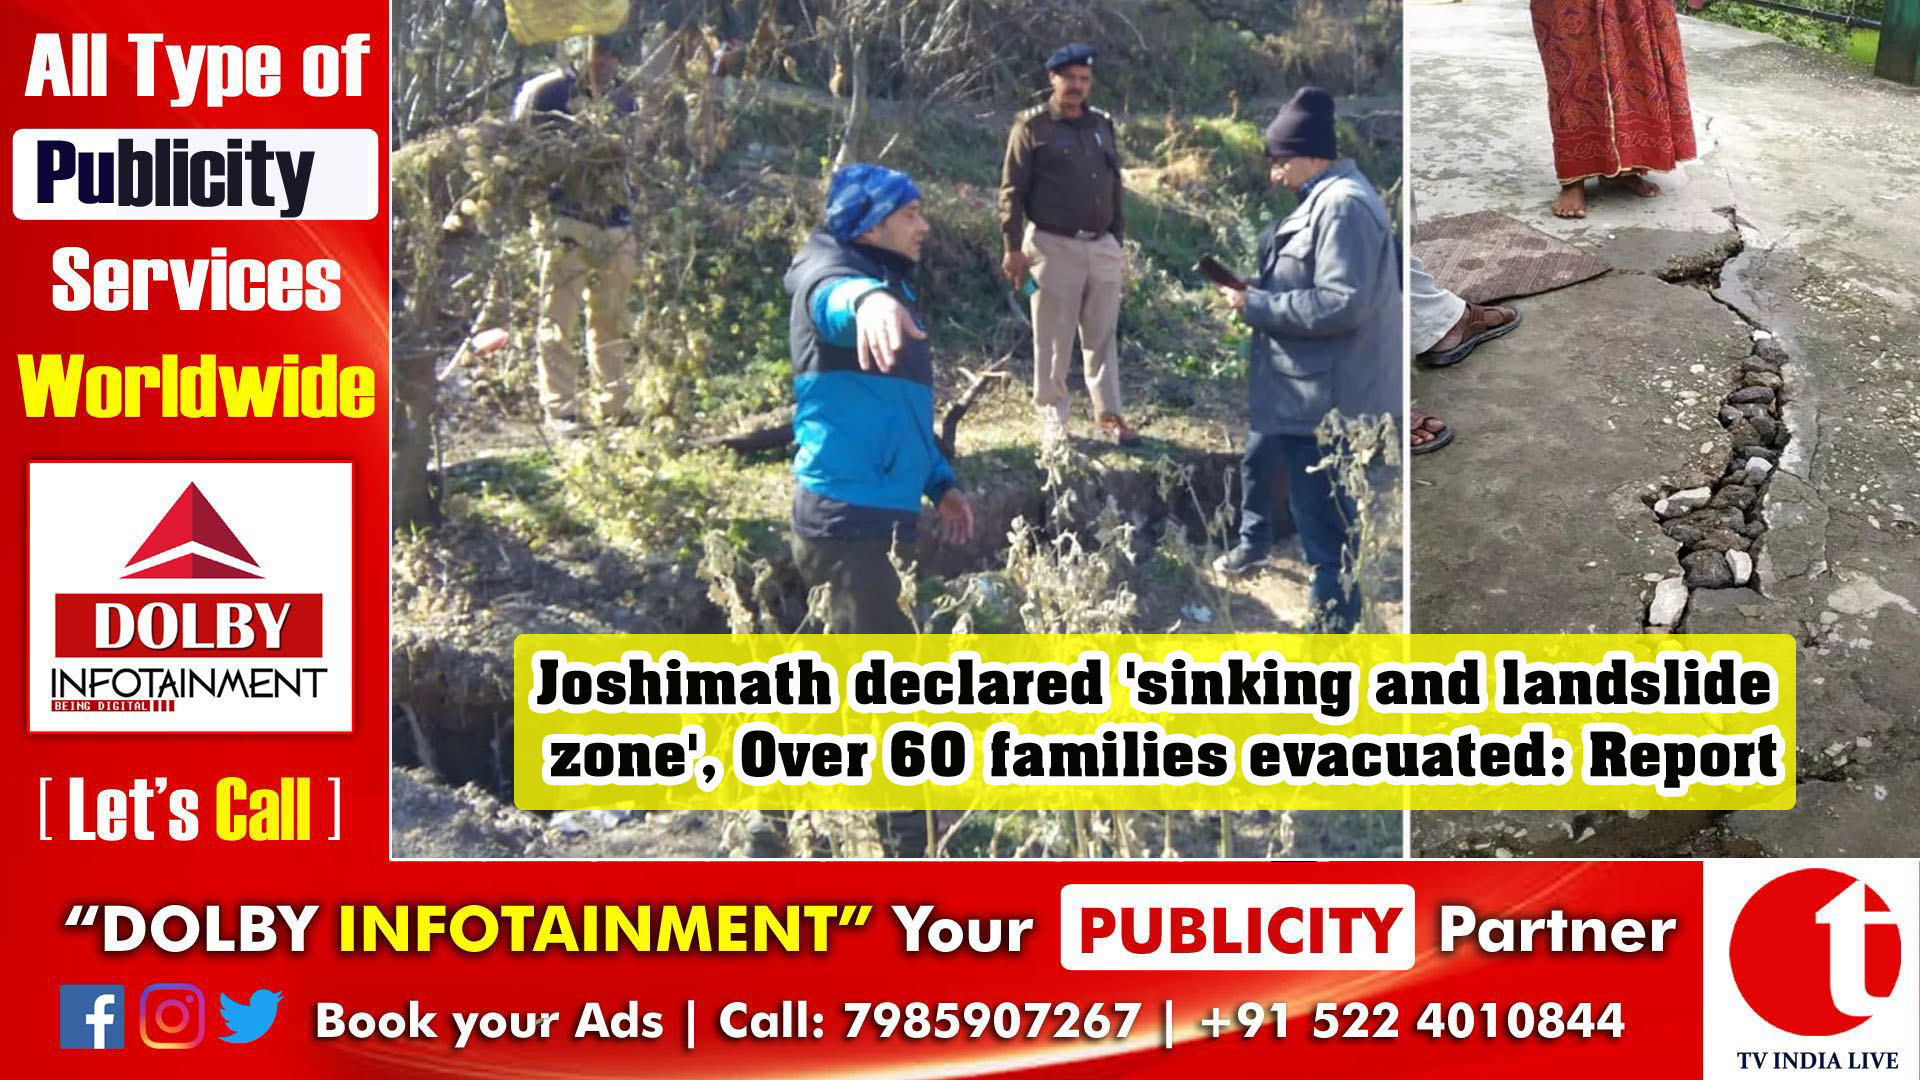 Joshimath declared 'sinking and landslide zone', Over 60 families evacuated: Report